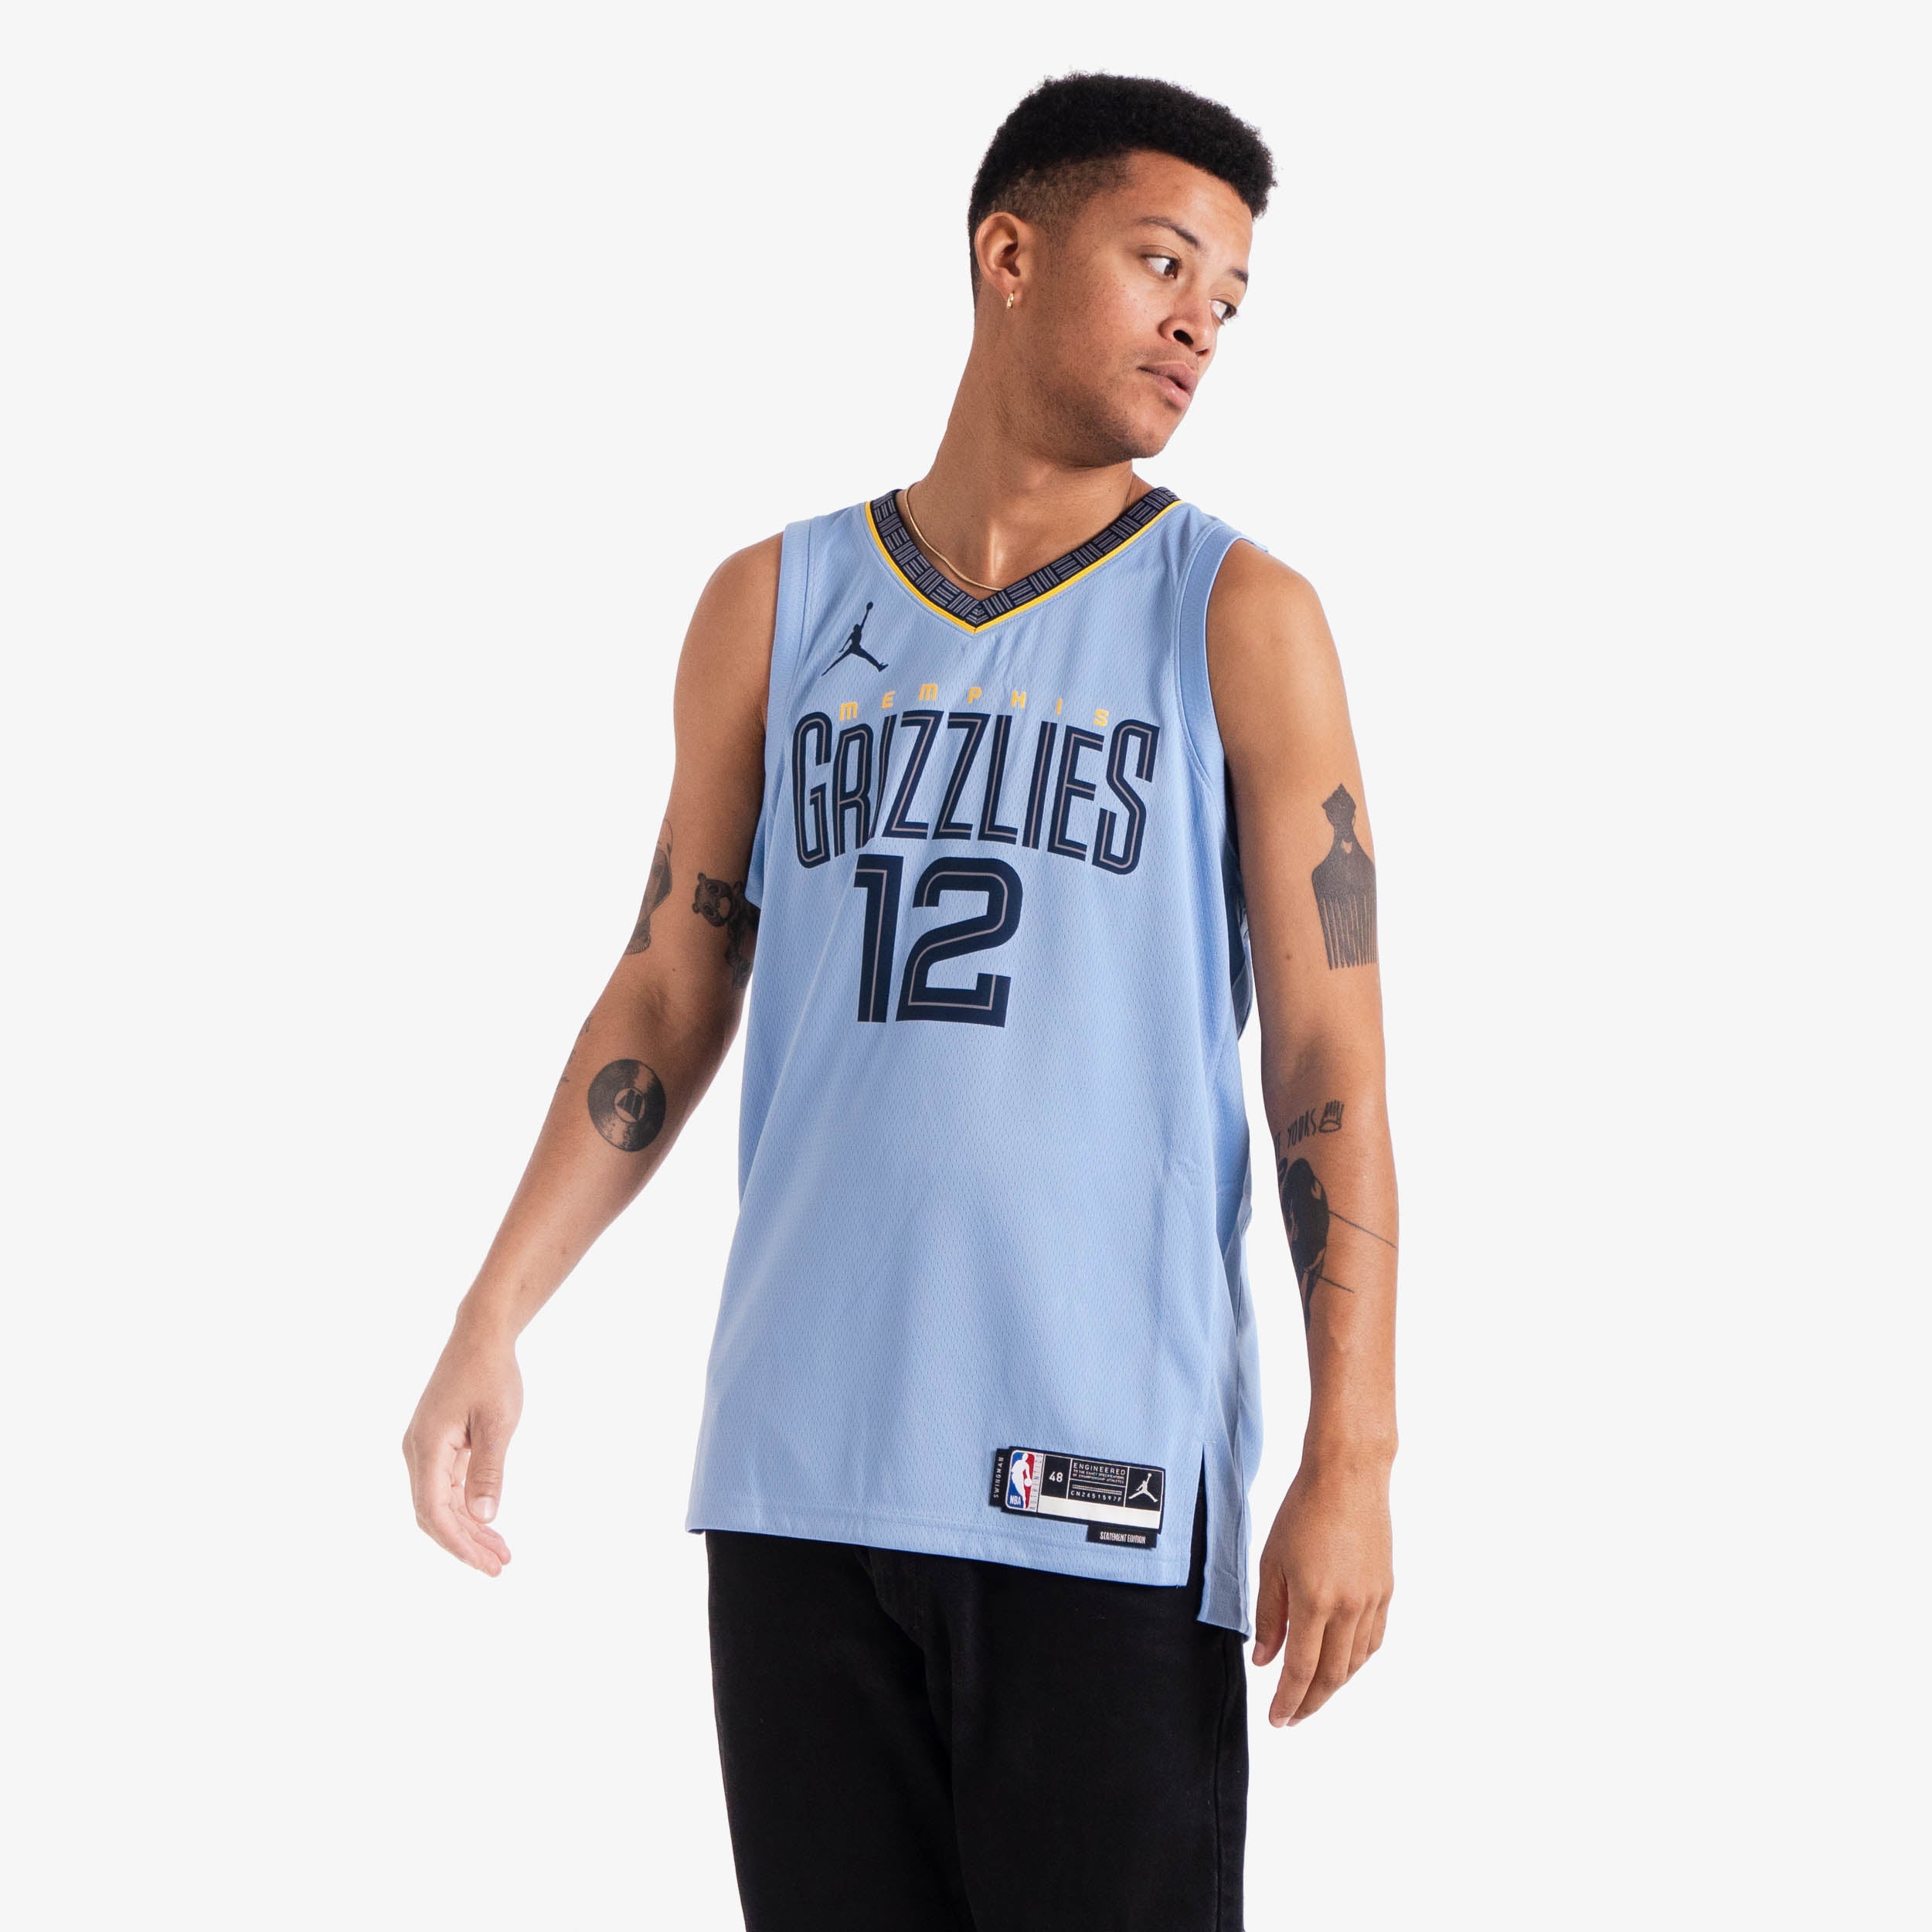 New Nike Memphis Grizzlies Icon Edition Jersey Sz 48 Large Mike